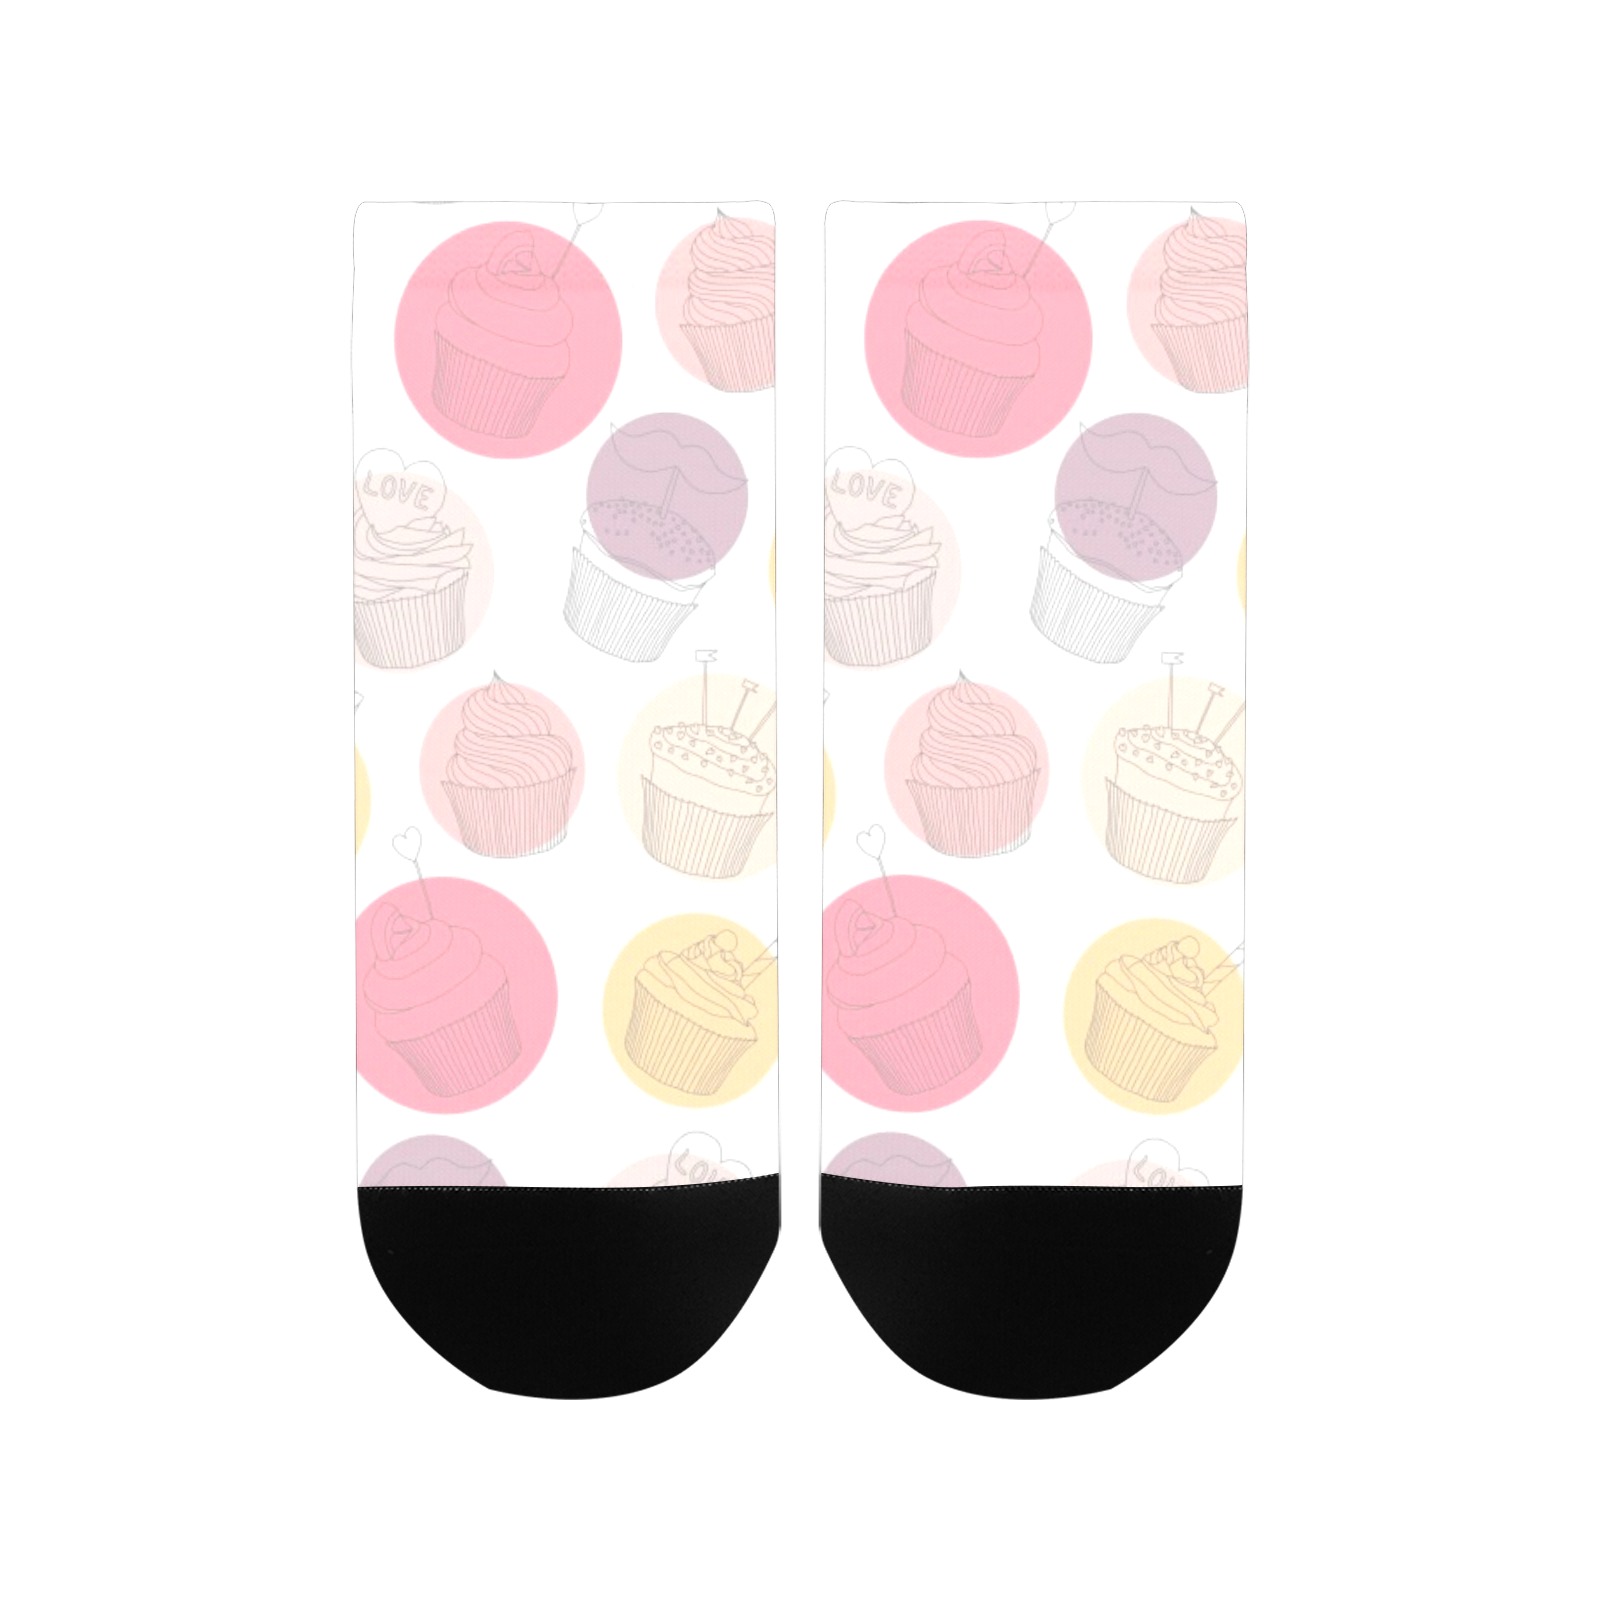 Colorful Cupcakes Women's Ankle Socks